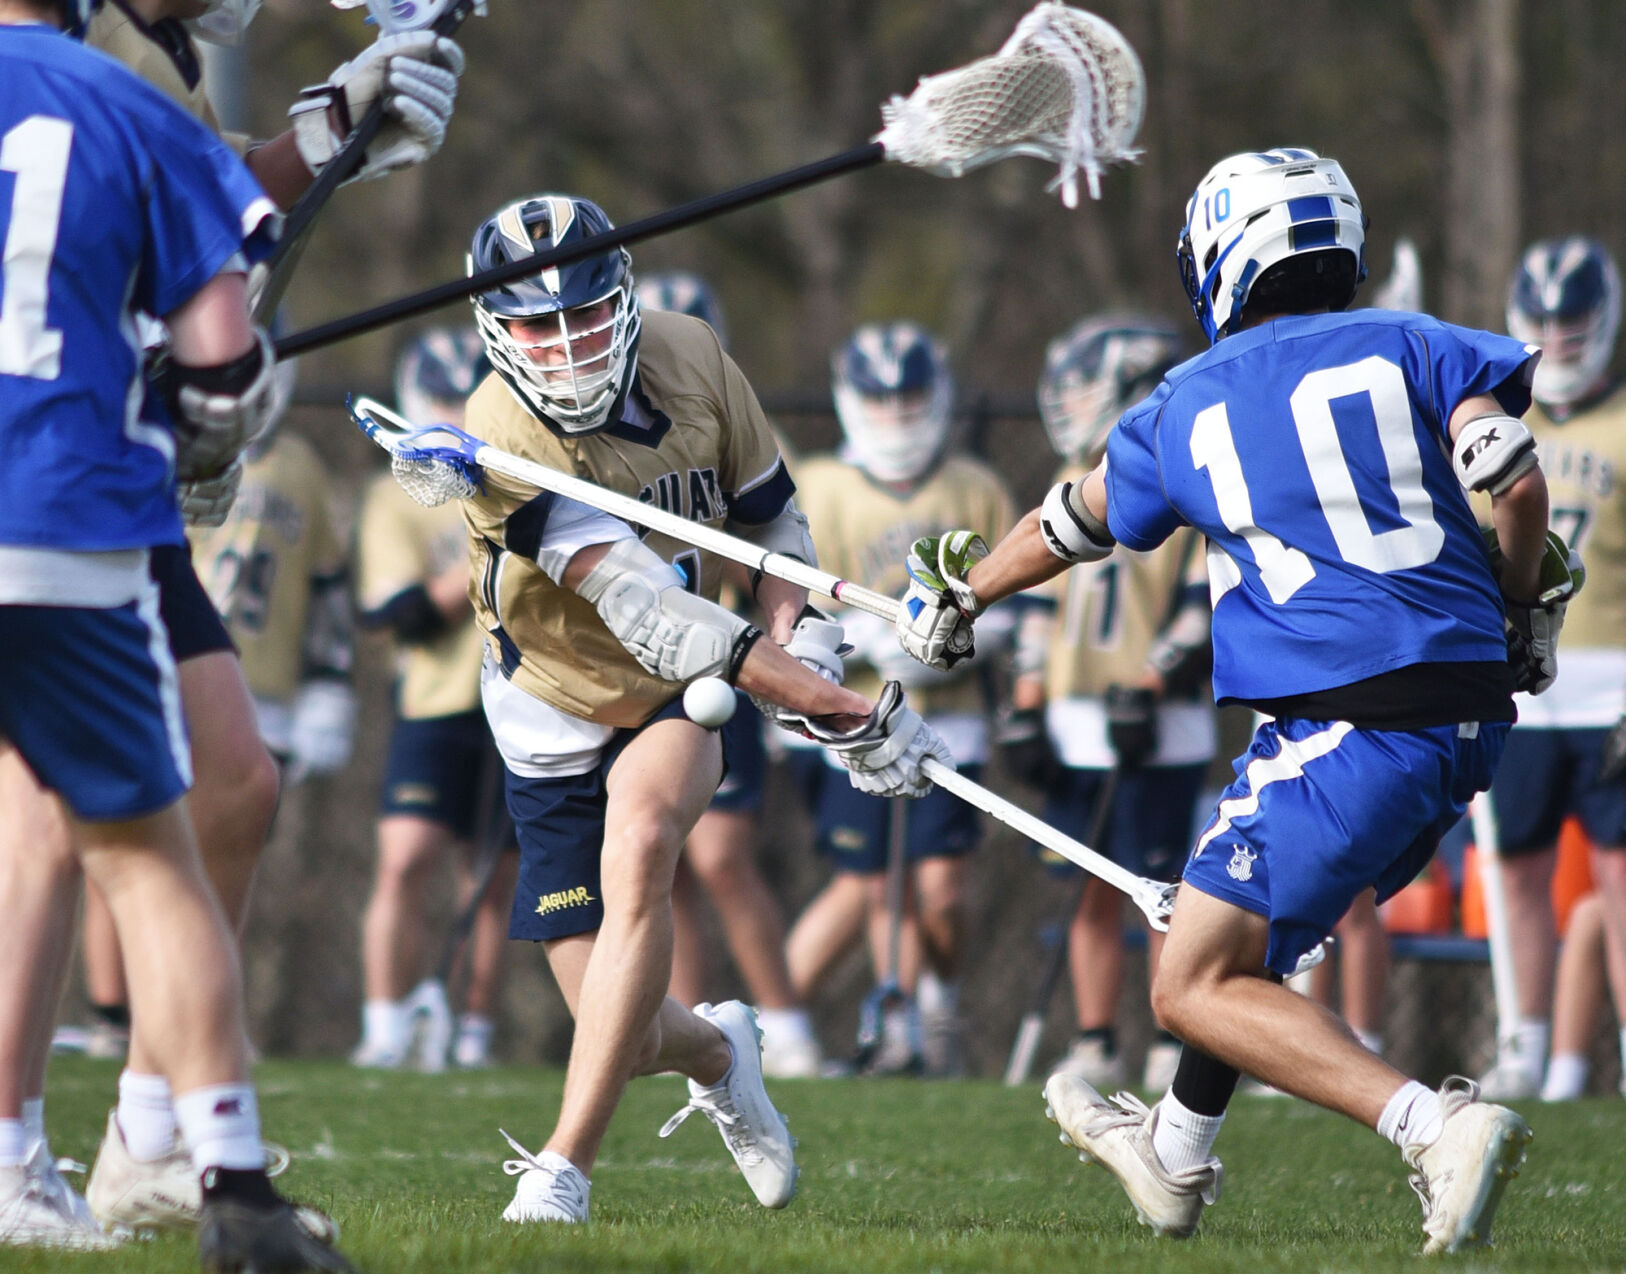 Andrew Trudel: Windham Defender Dominates Rival Salem with Bone-Crushing Hits and Leadership